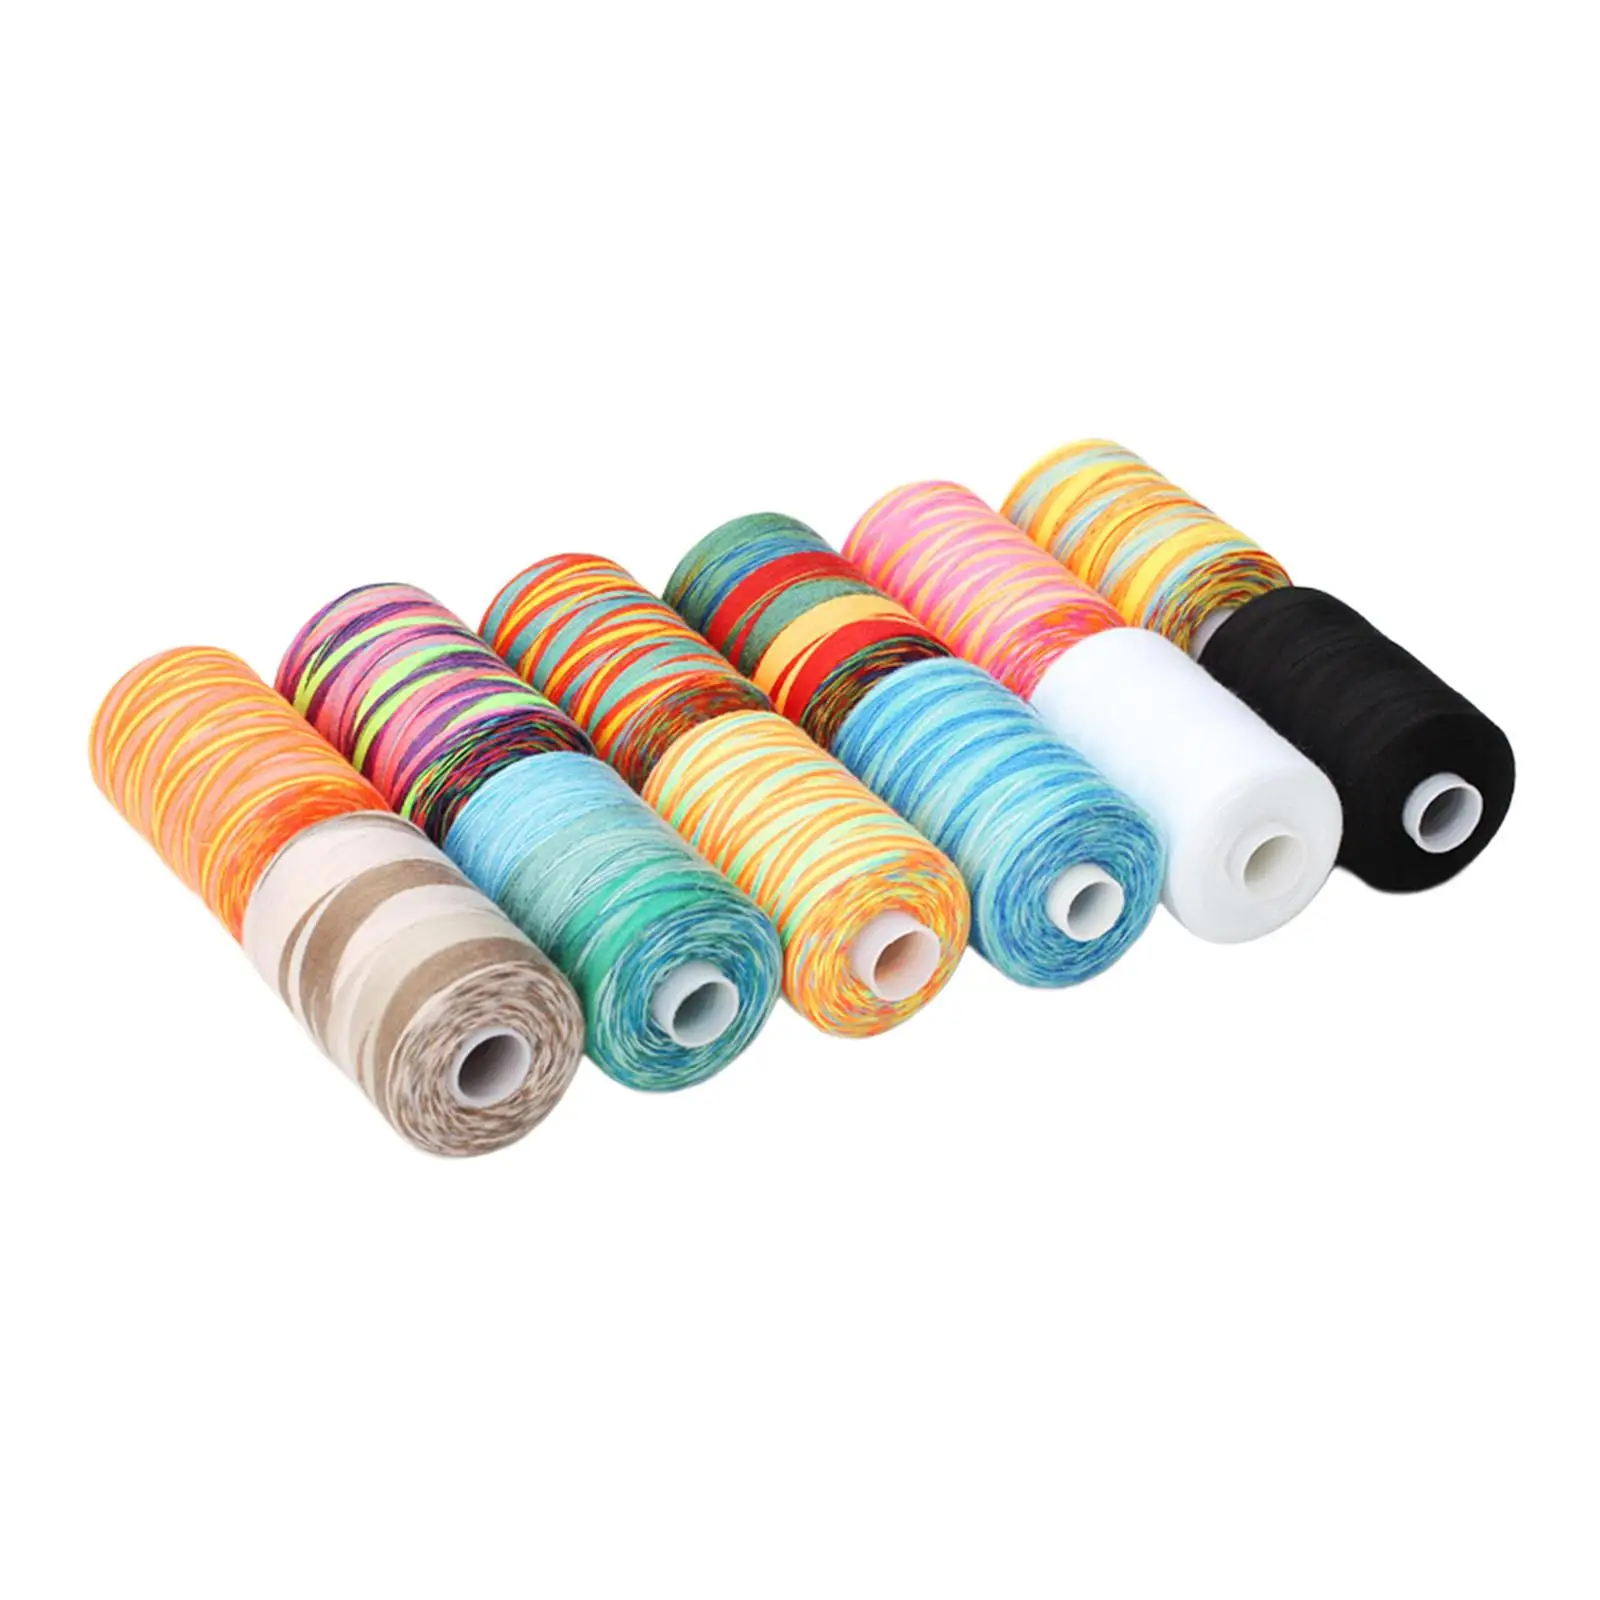 12 Pieces Multicolor Sewing Thread Set Multi Purpose Polyester Thread Spools for Cross Stitching Sewing Quilting Supplies